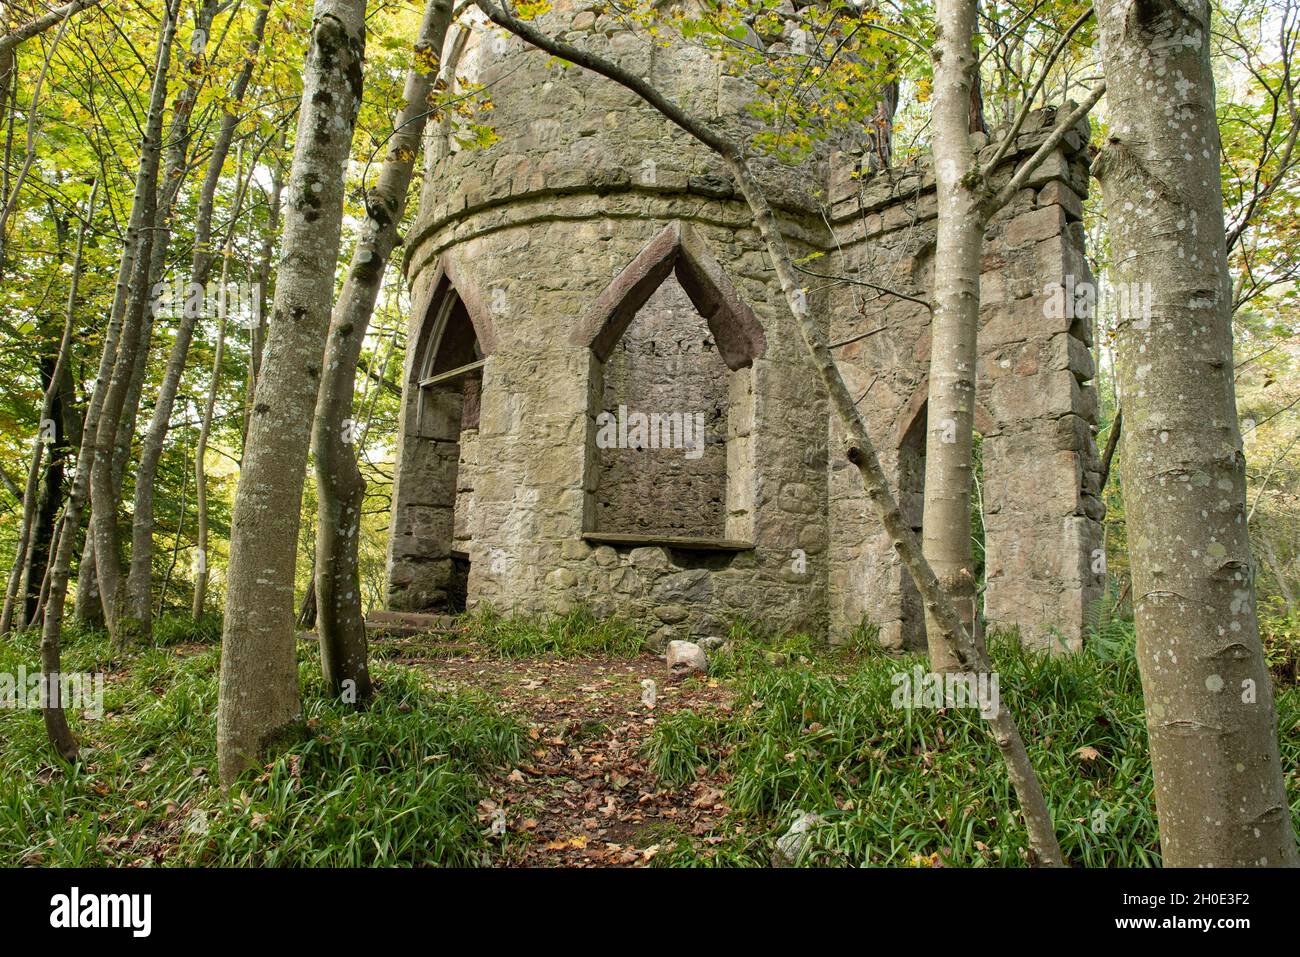 Doulie Tower a folly in woodland near to Rocks of Solitude, Glen Esk, Angus, Scotland. Stock Photo